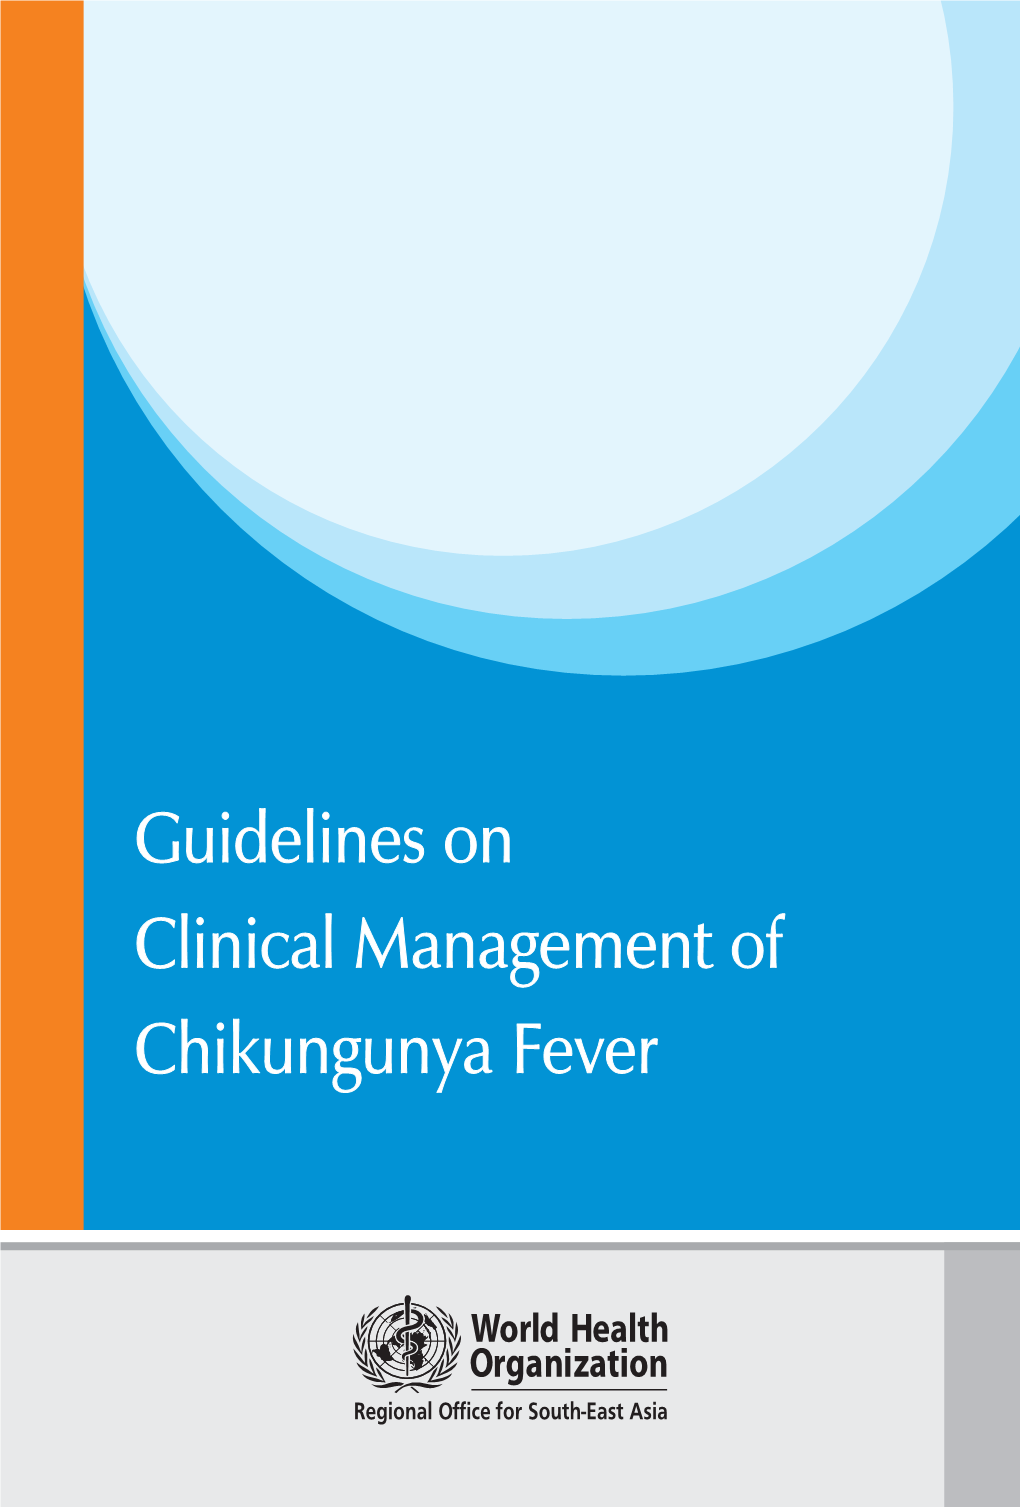 Guidelines on Clinical Management of Chikungunya Fever